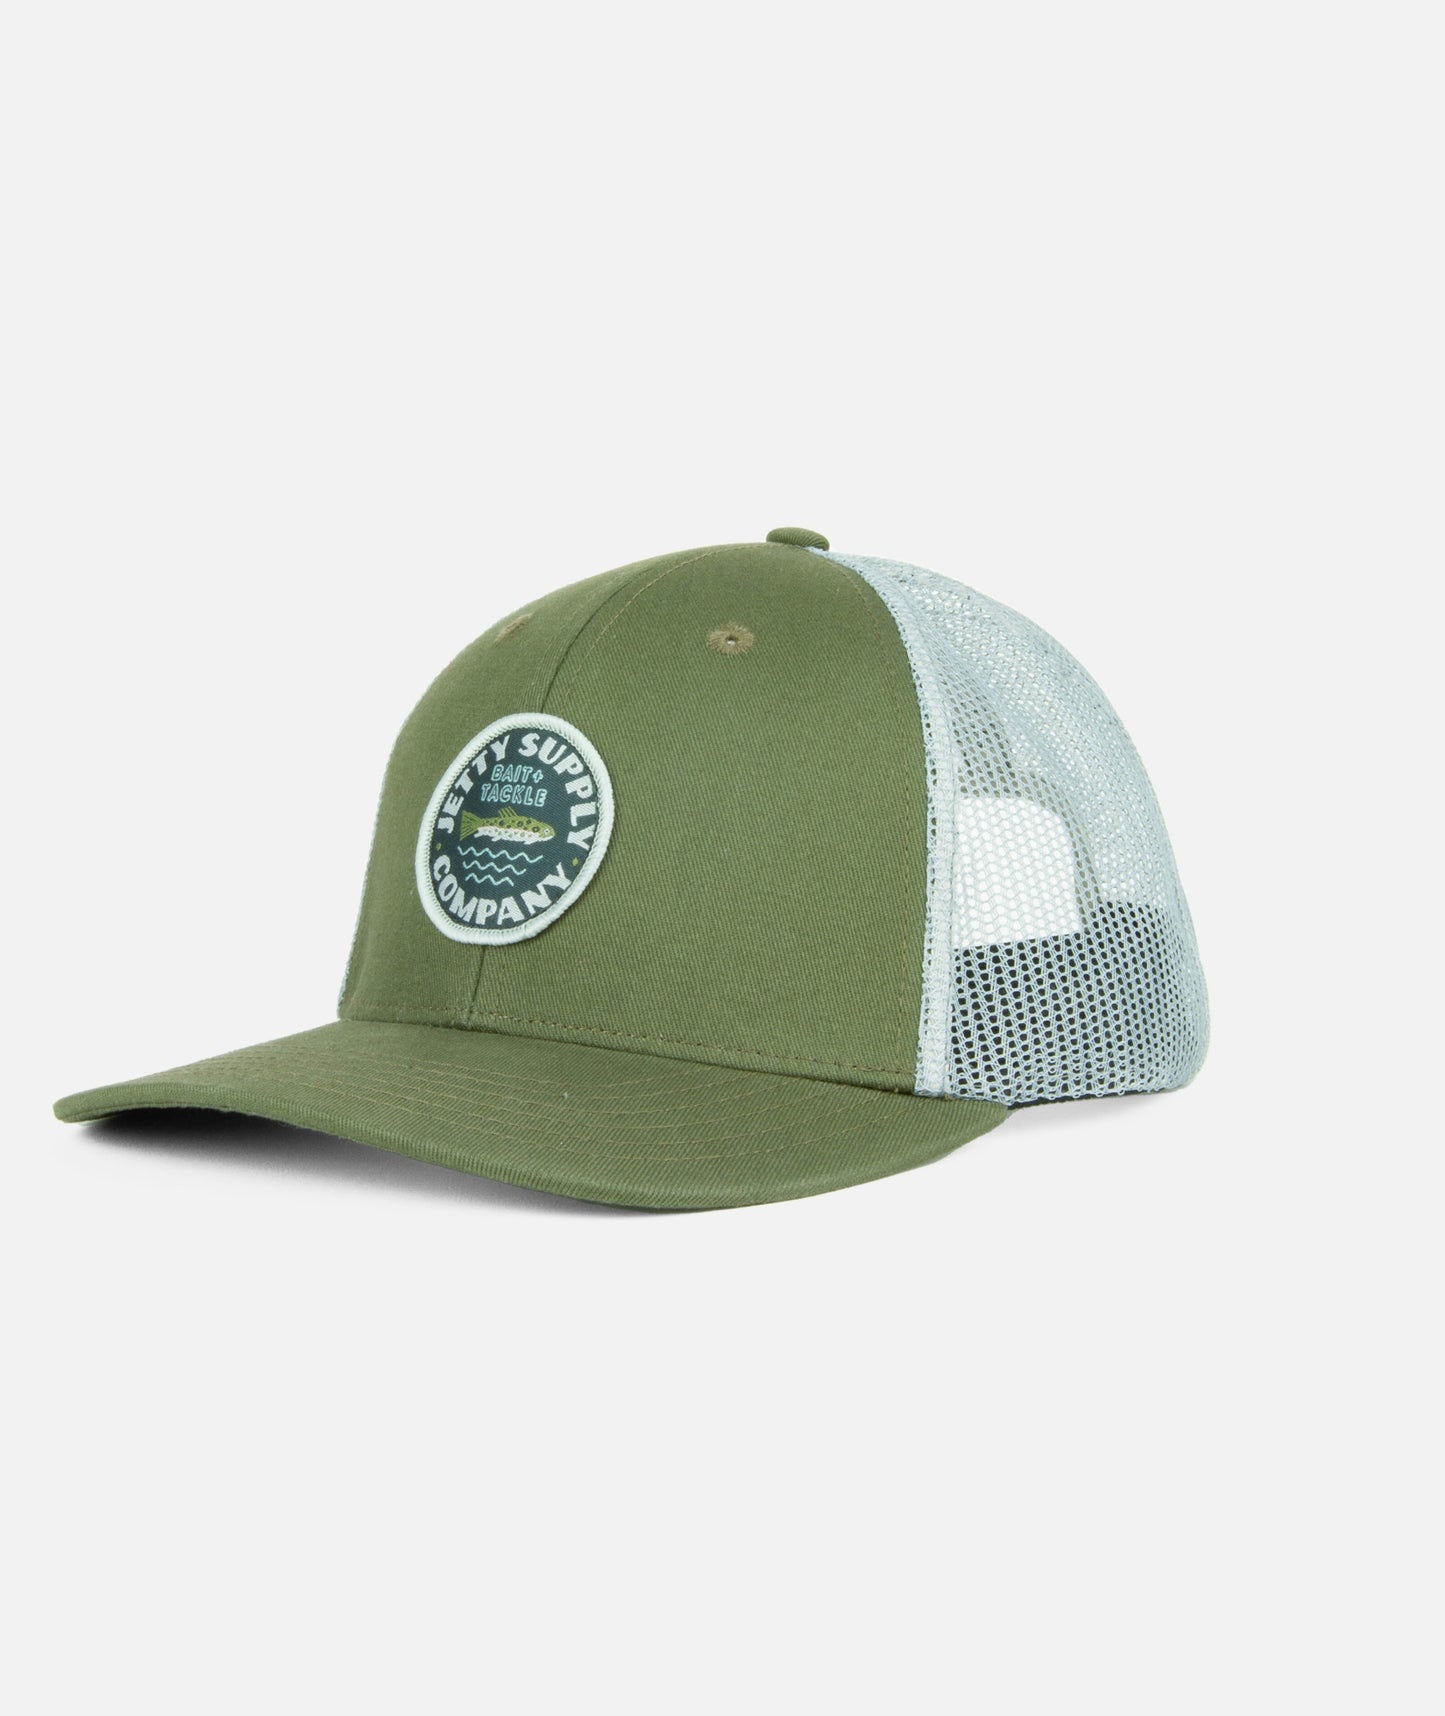 Trout Trucker - Agave